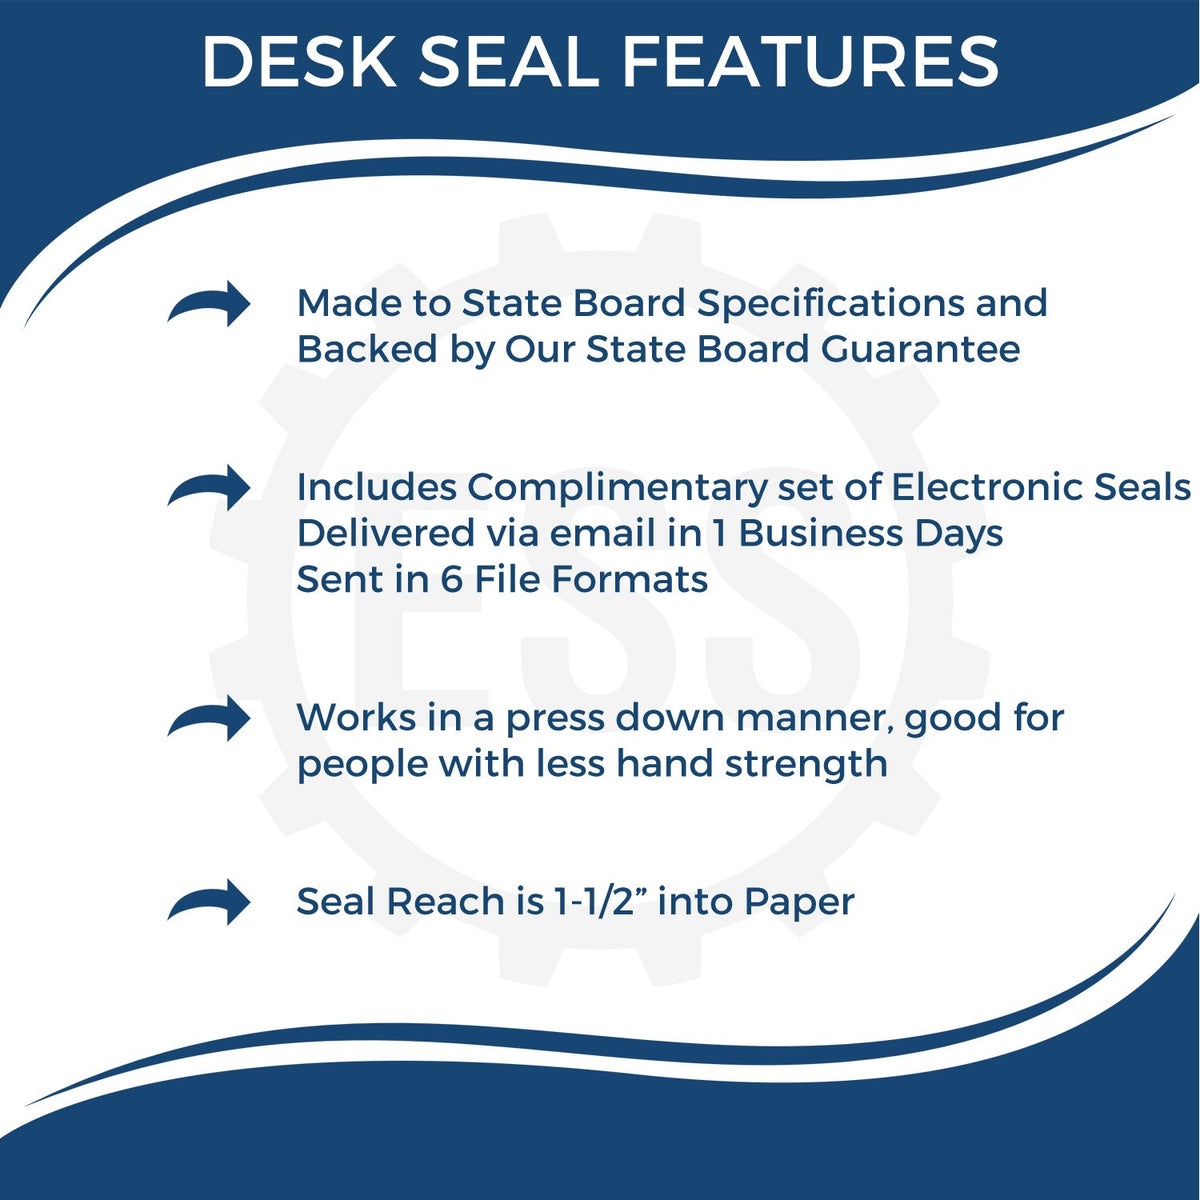 A picture of an infographic highlighting the selling points for the North Carolina Engineer Desk Seal